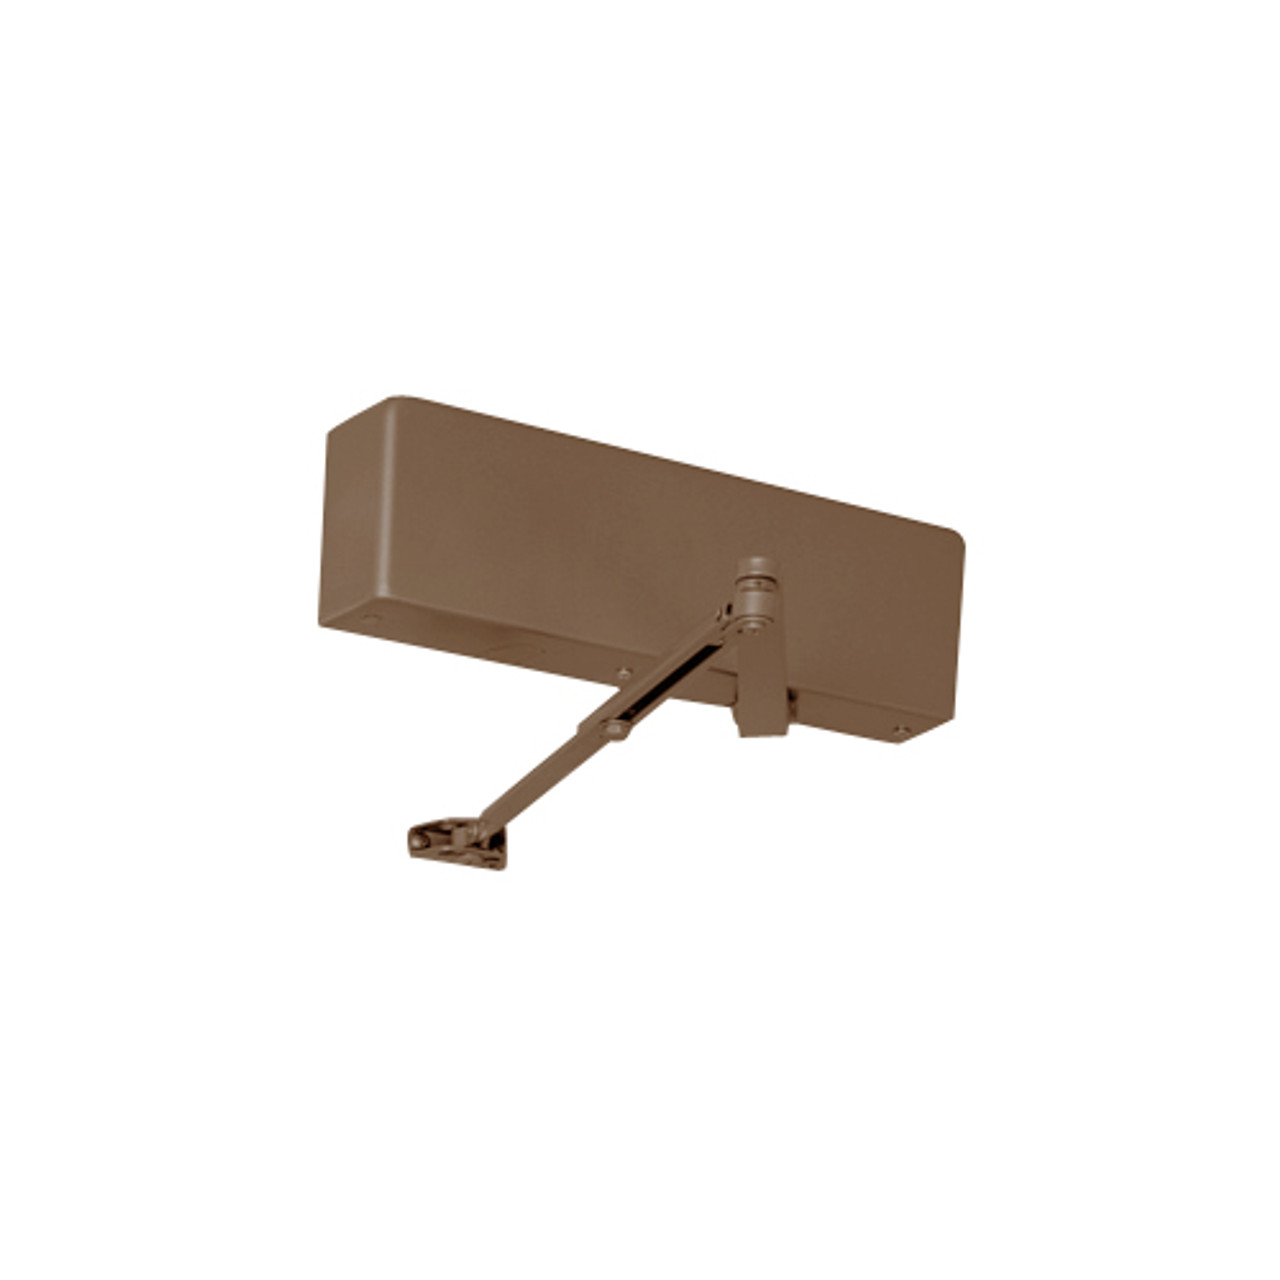 JS7500DA-691 Norton 7500 Series Non-Hold Open Institutional Door Closer with Top Jamb Application 3 inch Maximum Reveal in Dull Bronze Finish